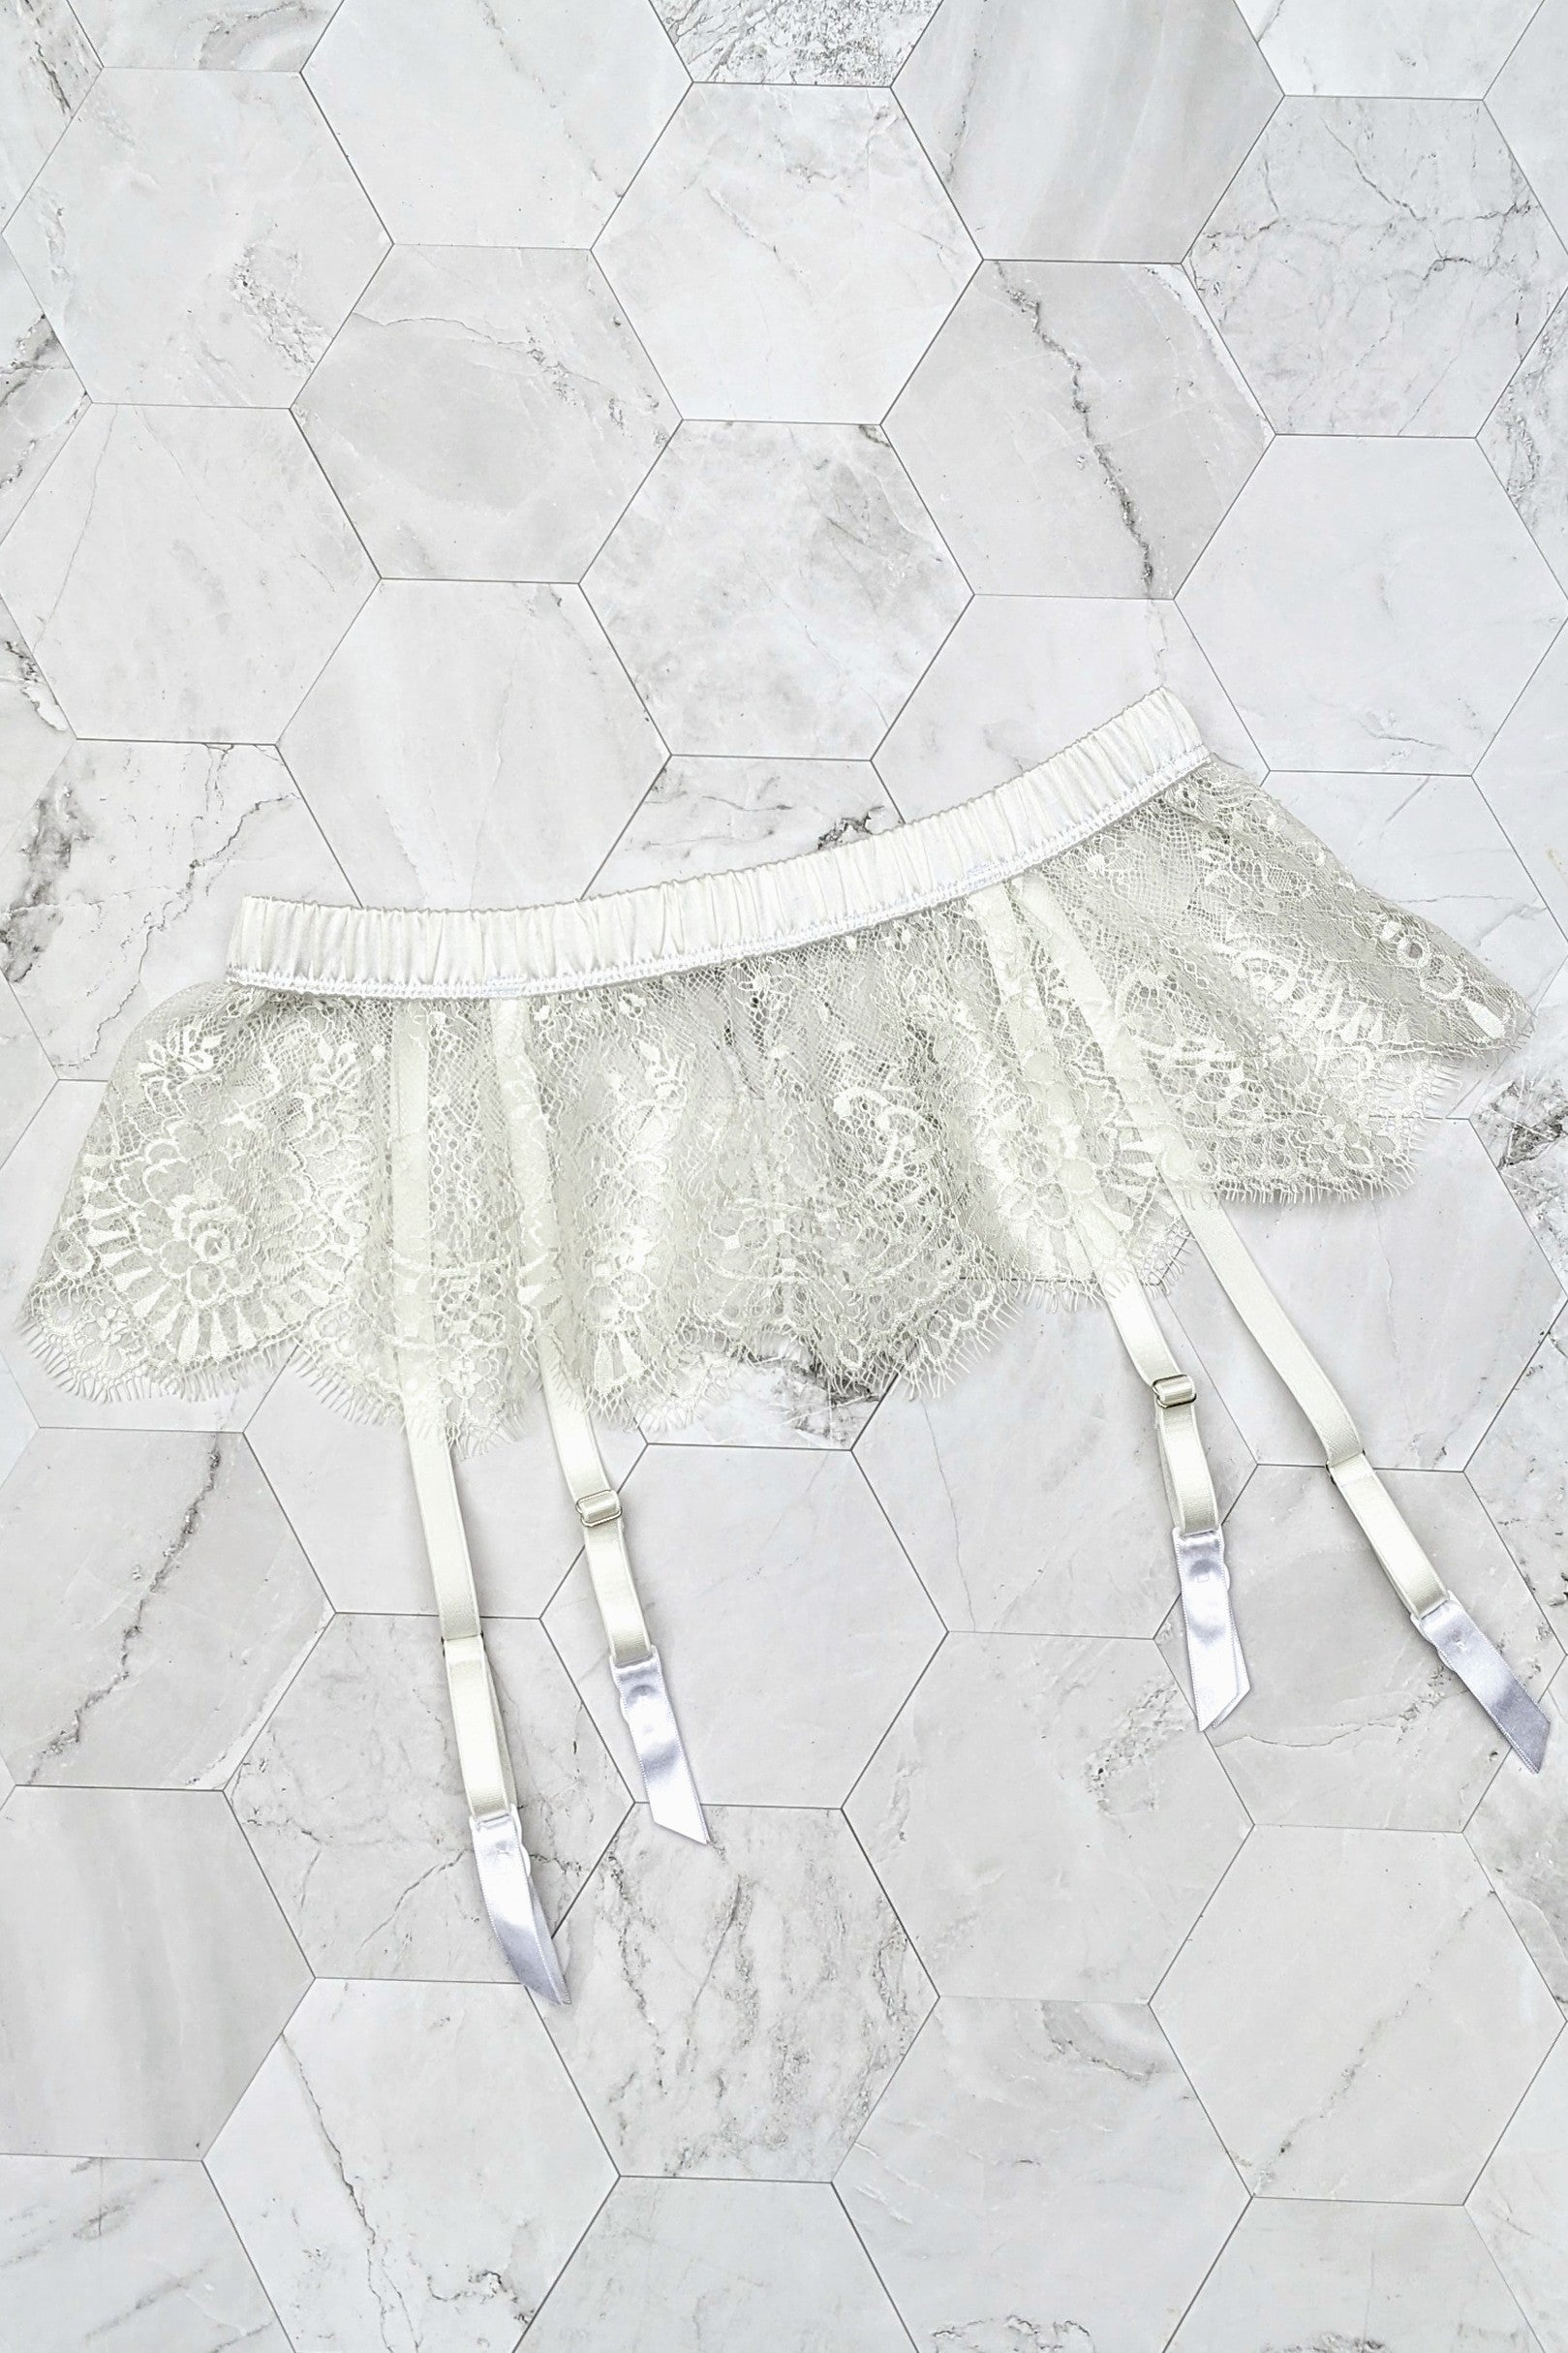 Lace 6 Strap Suspender Belt with High Waist and Boned in Black or White